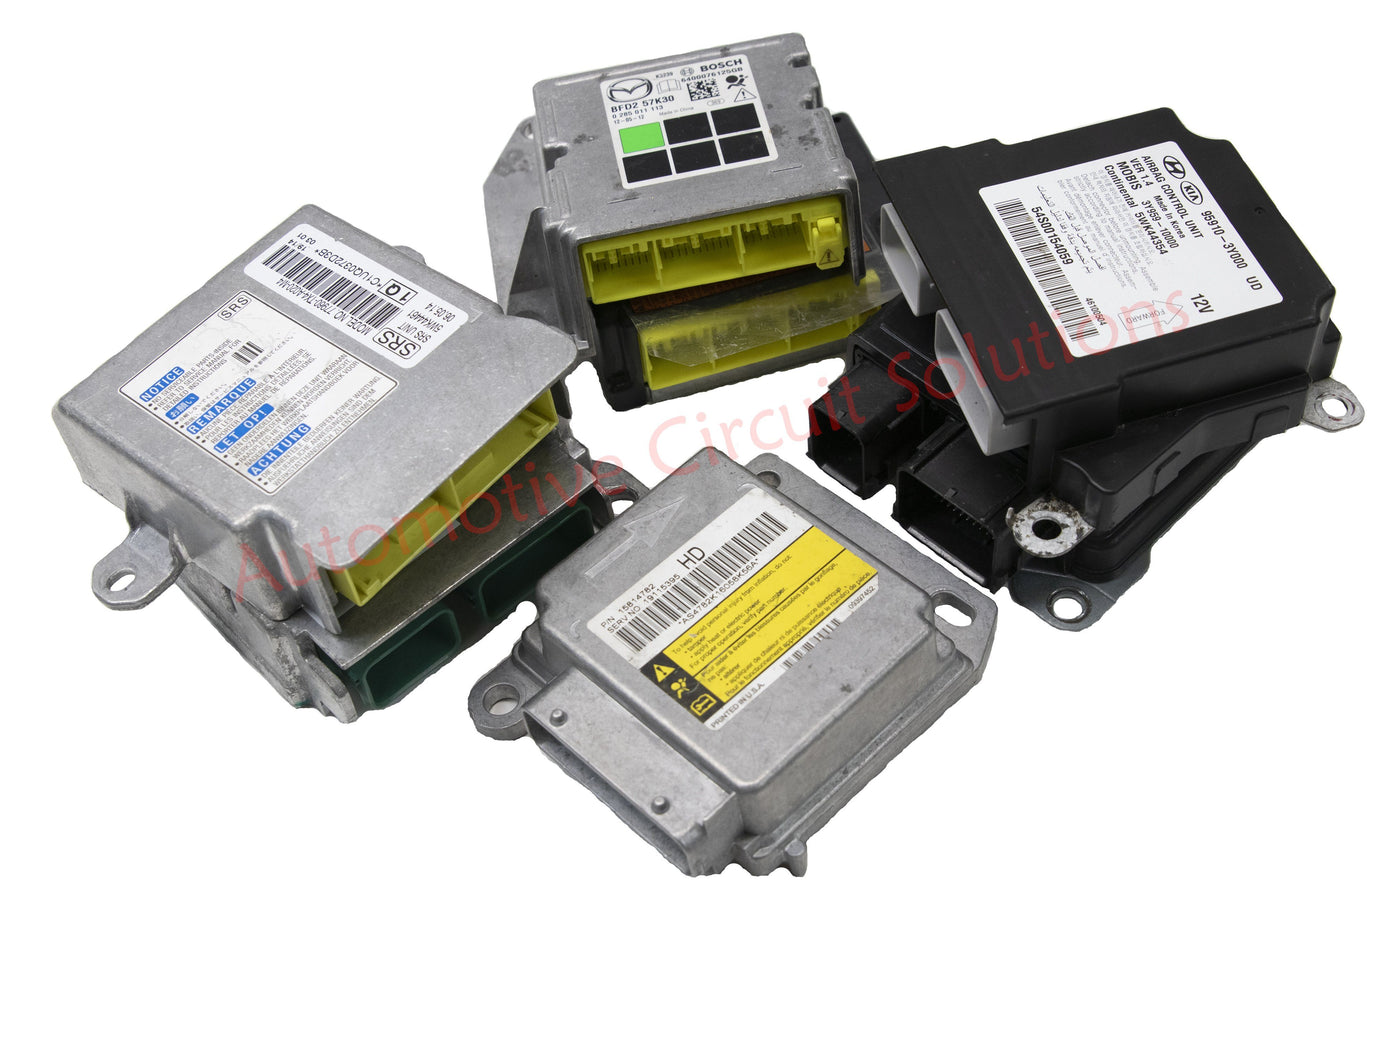 ACURA SRS AIRBAG CONTROL MODULE RESET SERVICE (24H Turn Around) SRS Module Reset Automotive Circuit Solutions 